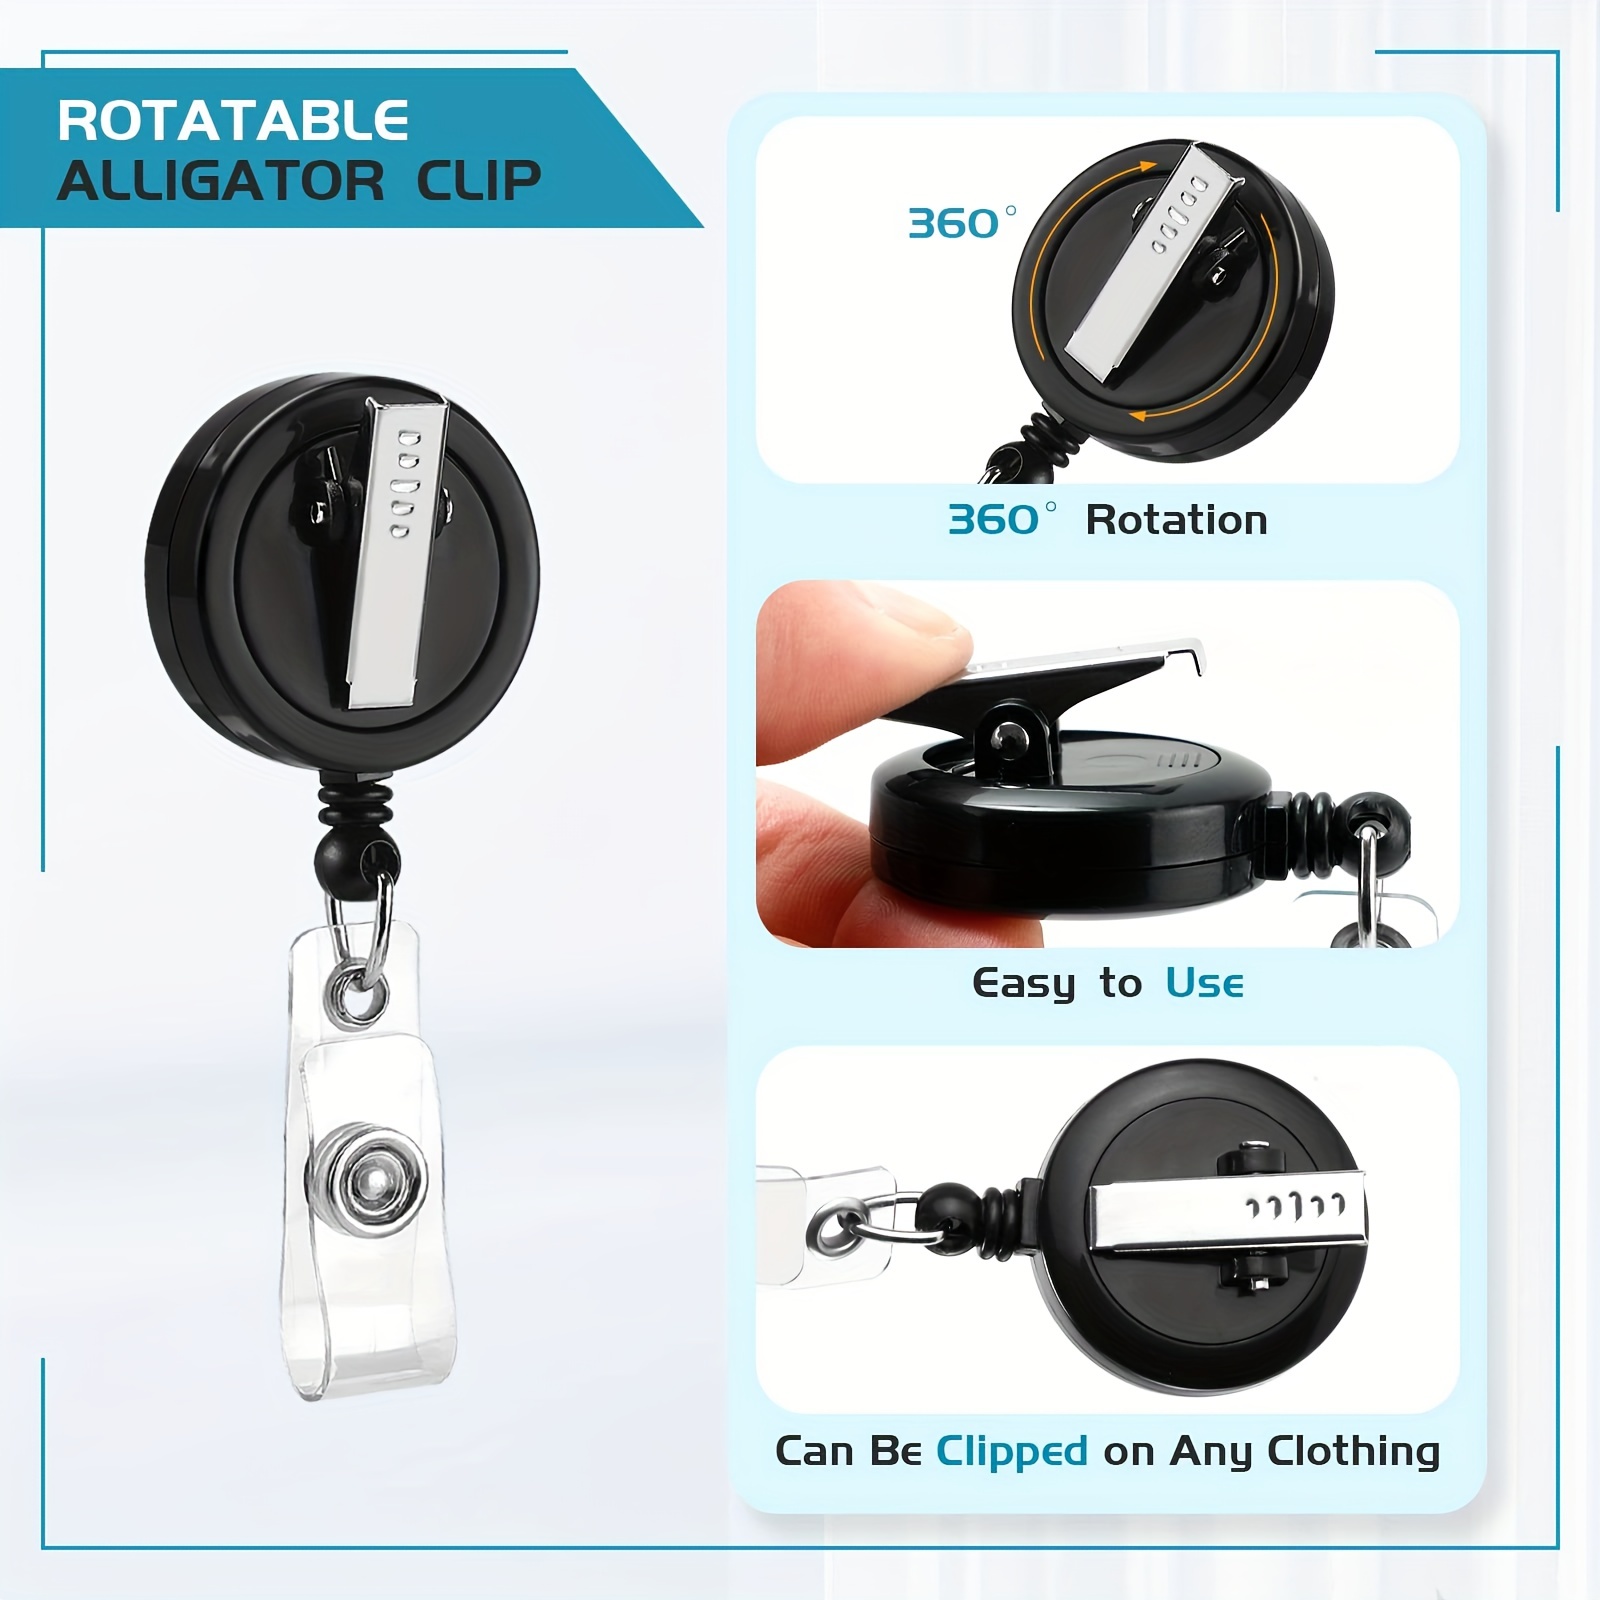 2pcs Retractable ID Name Badge Holder Reels Black and White Retractable Badge Reels with Alligator Swivel Clip,Flower,Bank,Cartoon,Heart,Rose,Candy